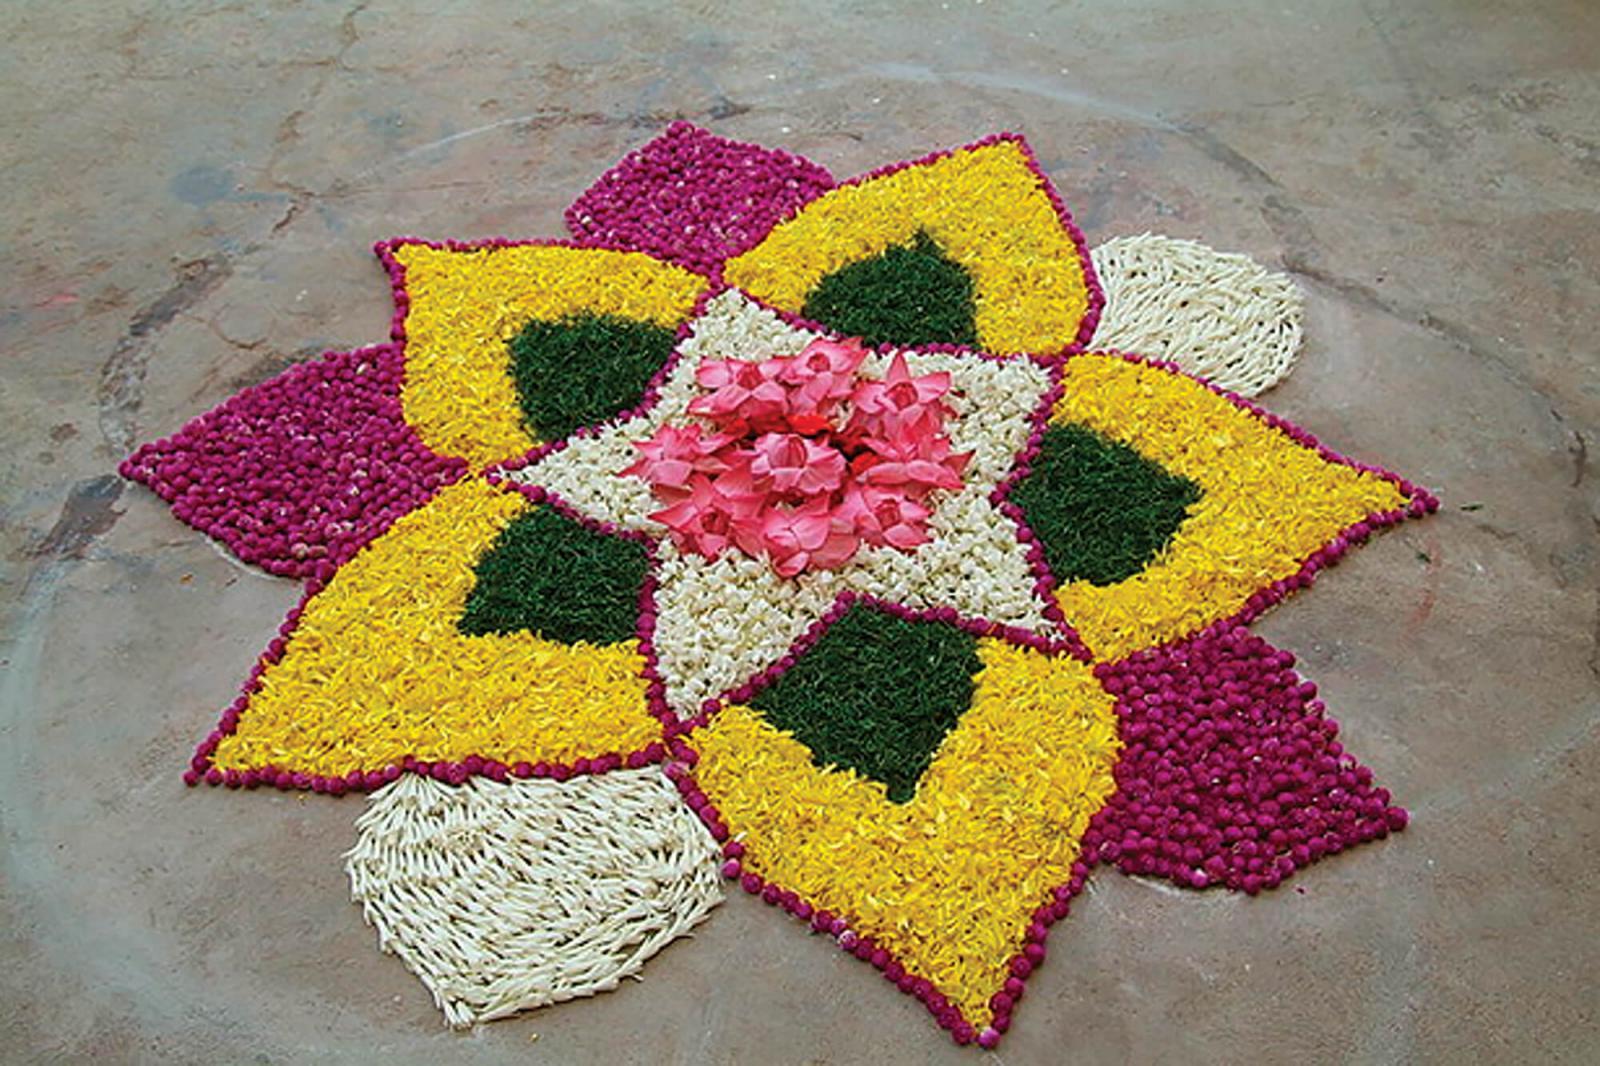 Flower heads and flower petals used to make a rangoli design.